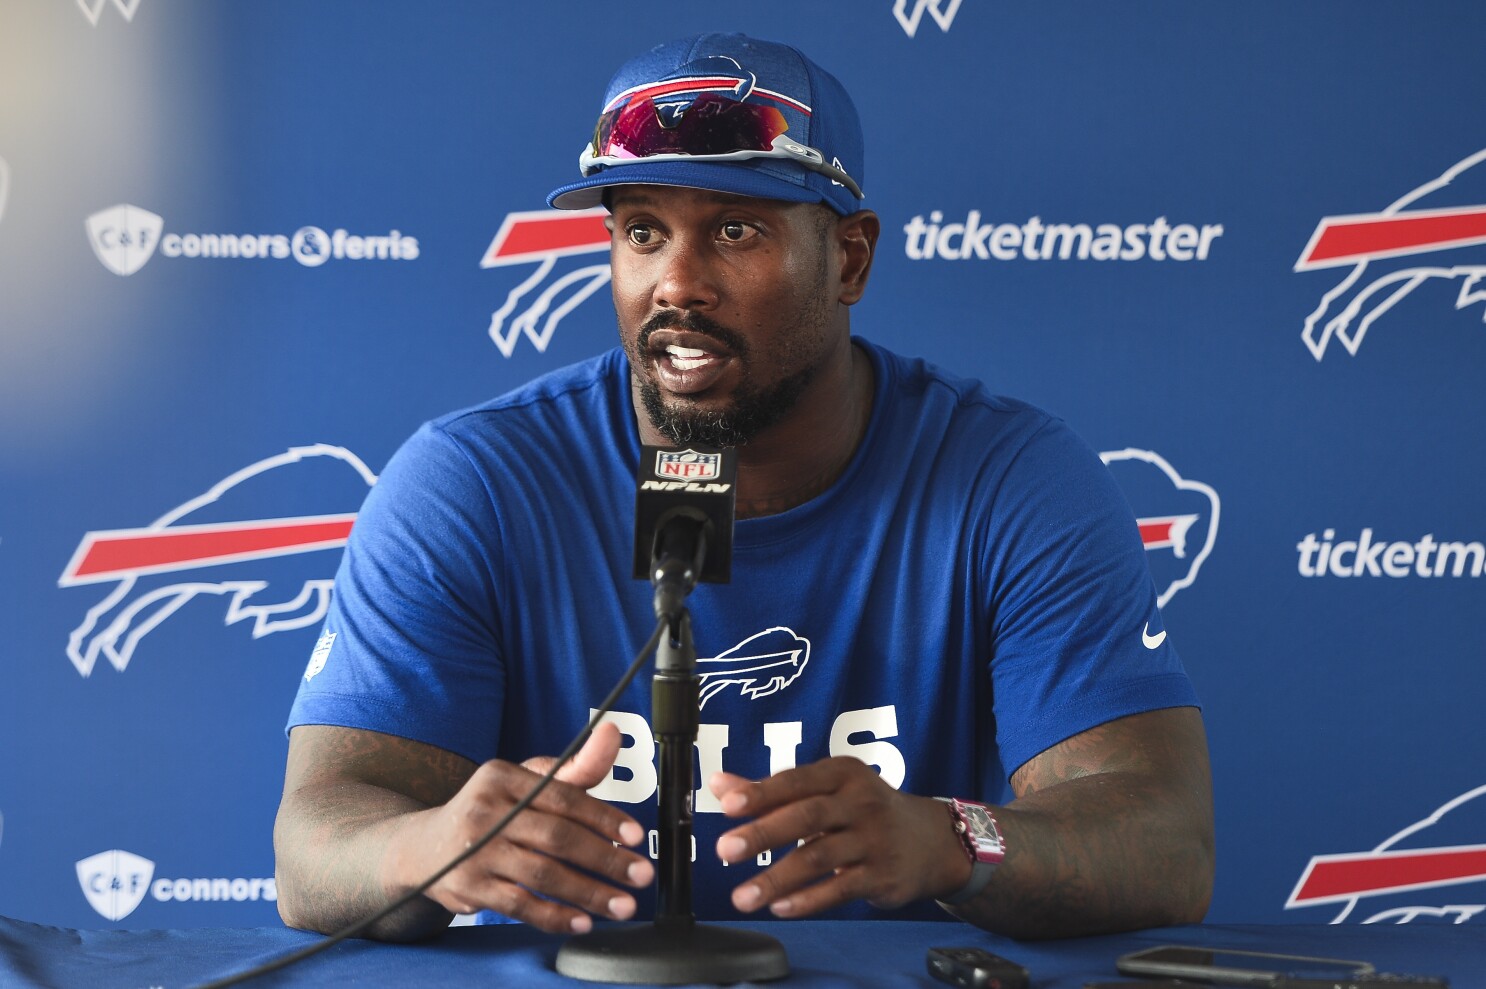 Bills share medical update on Dane Jackson after scary hit to head